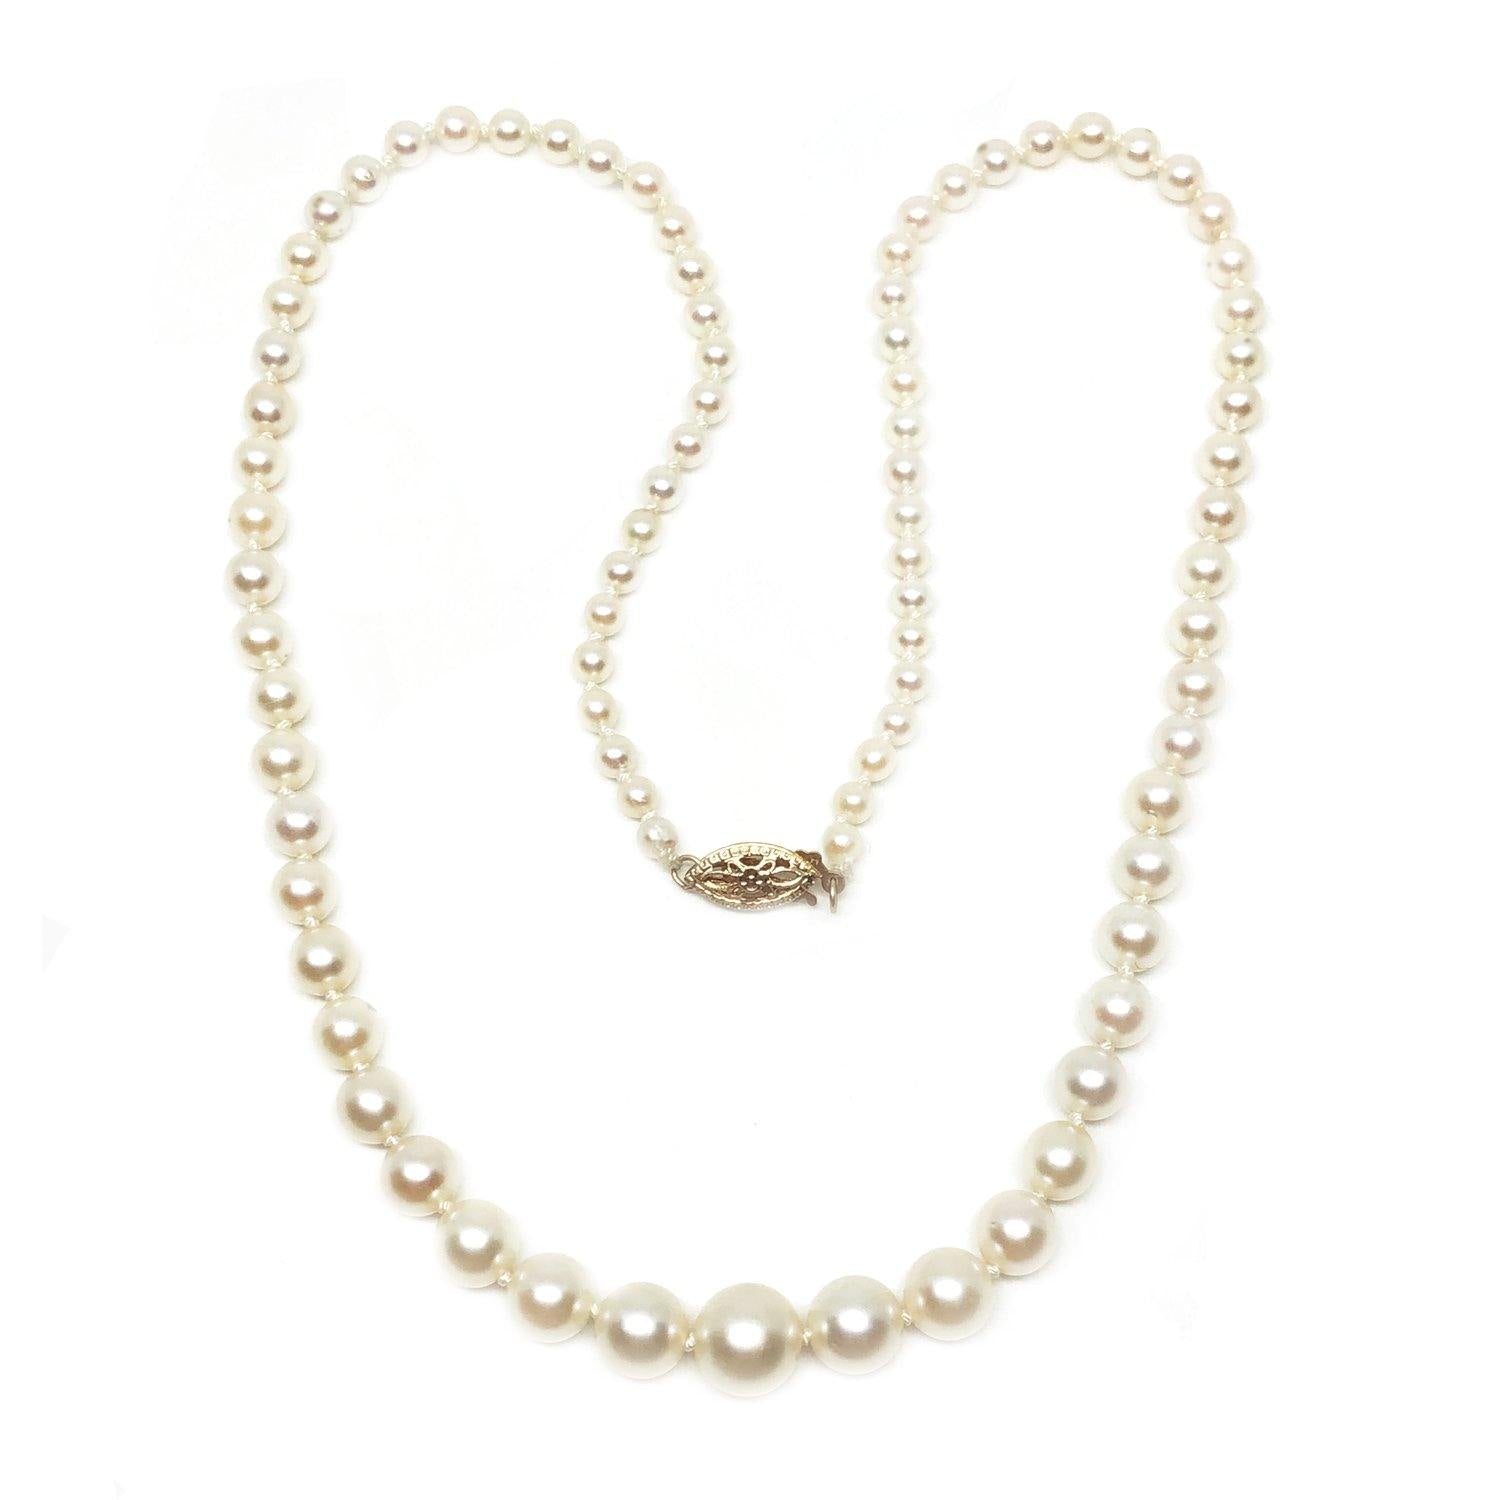 Graduated Mid-Century Japanese Cultured Akoya Pearl Necklace - 14K Yellow Gold 18.50 Inch